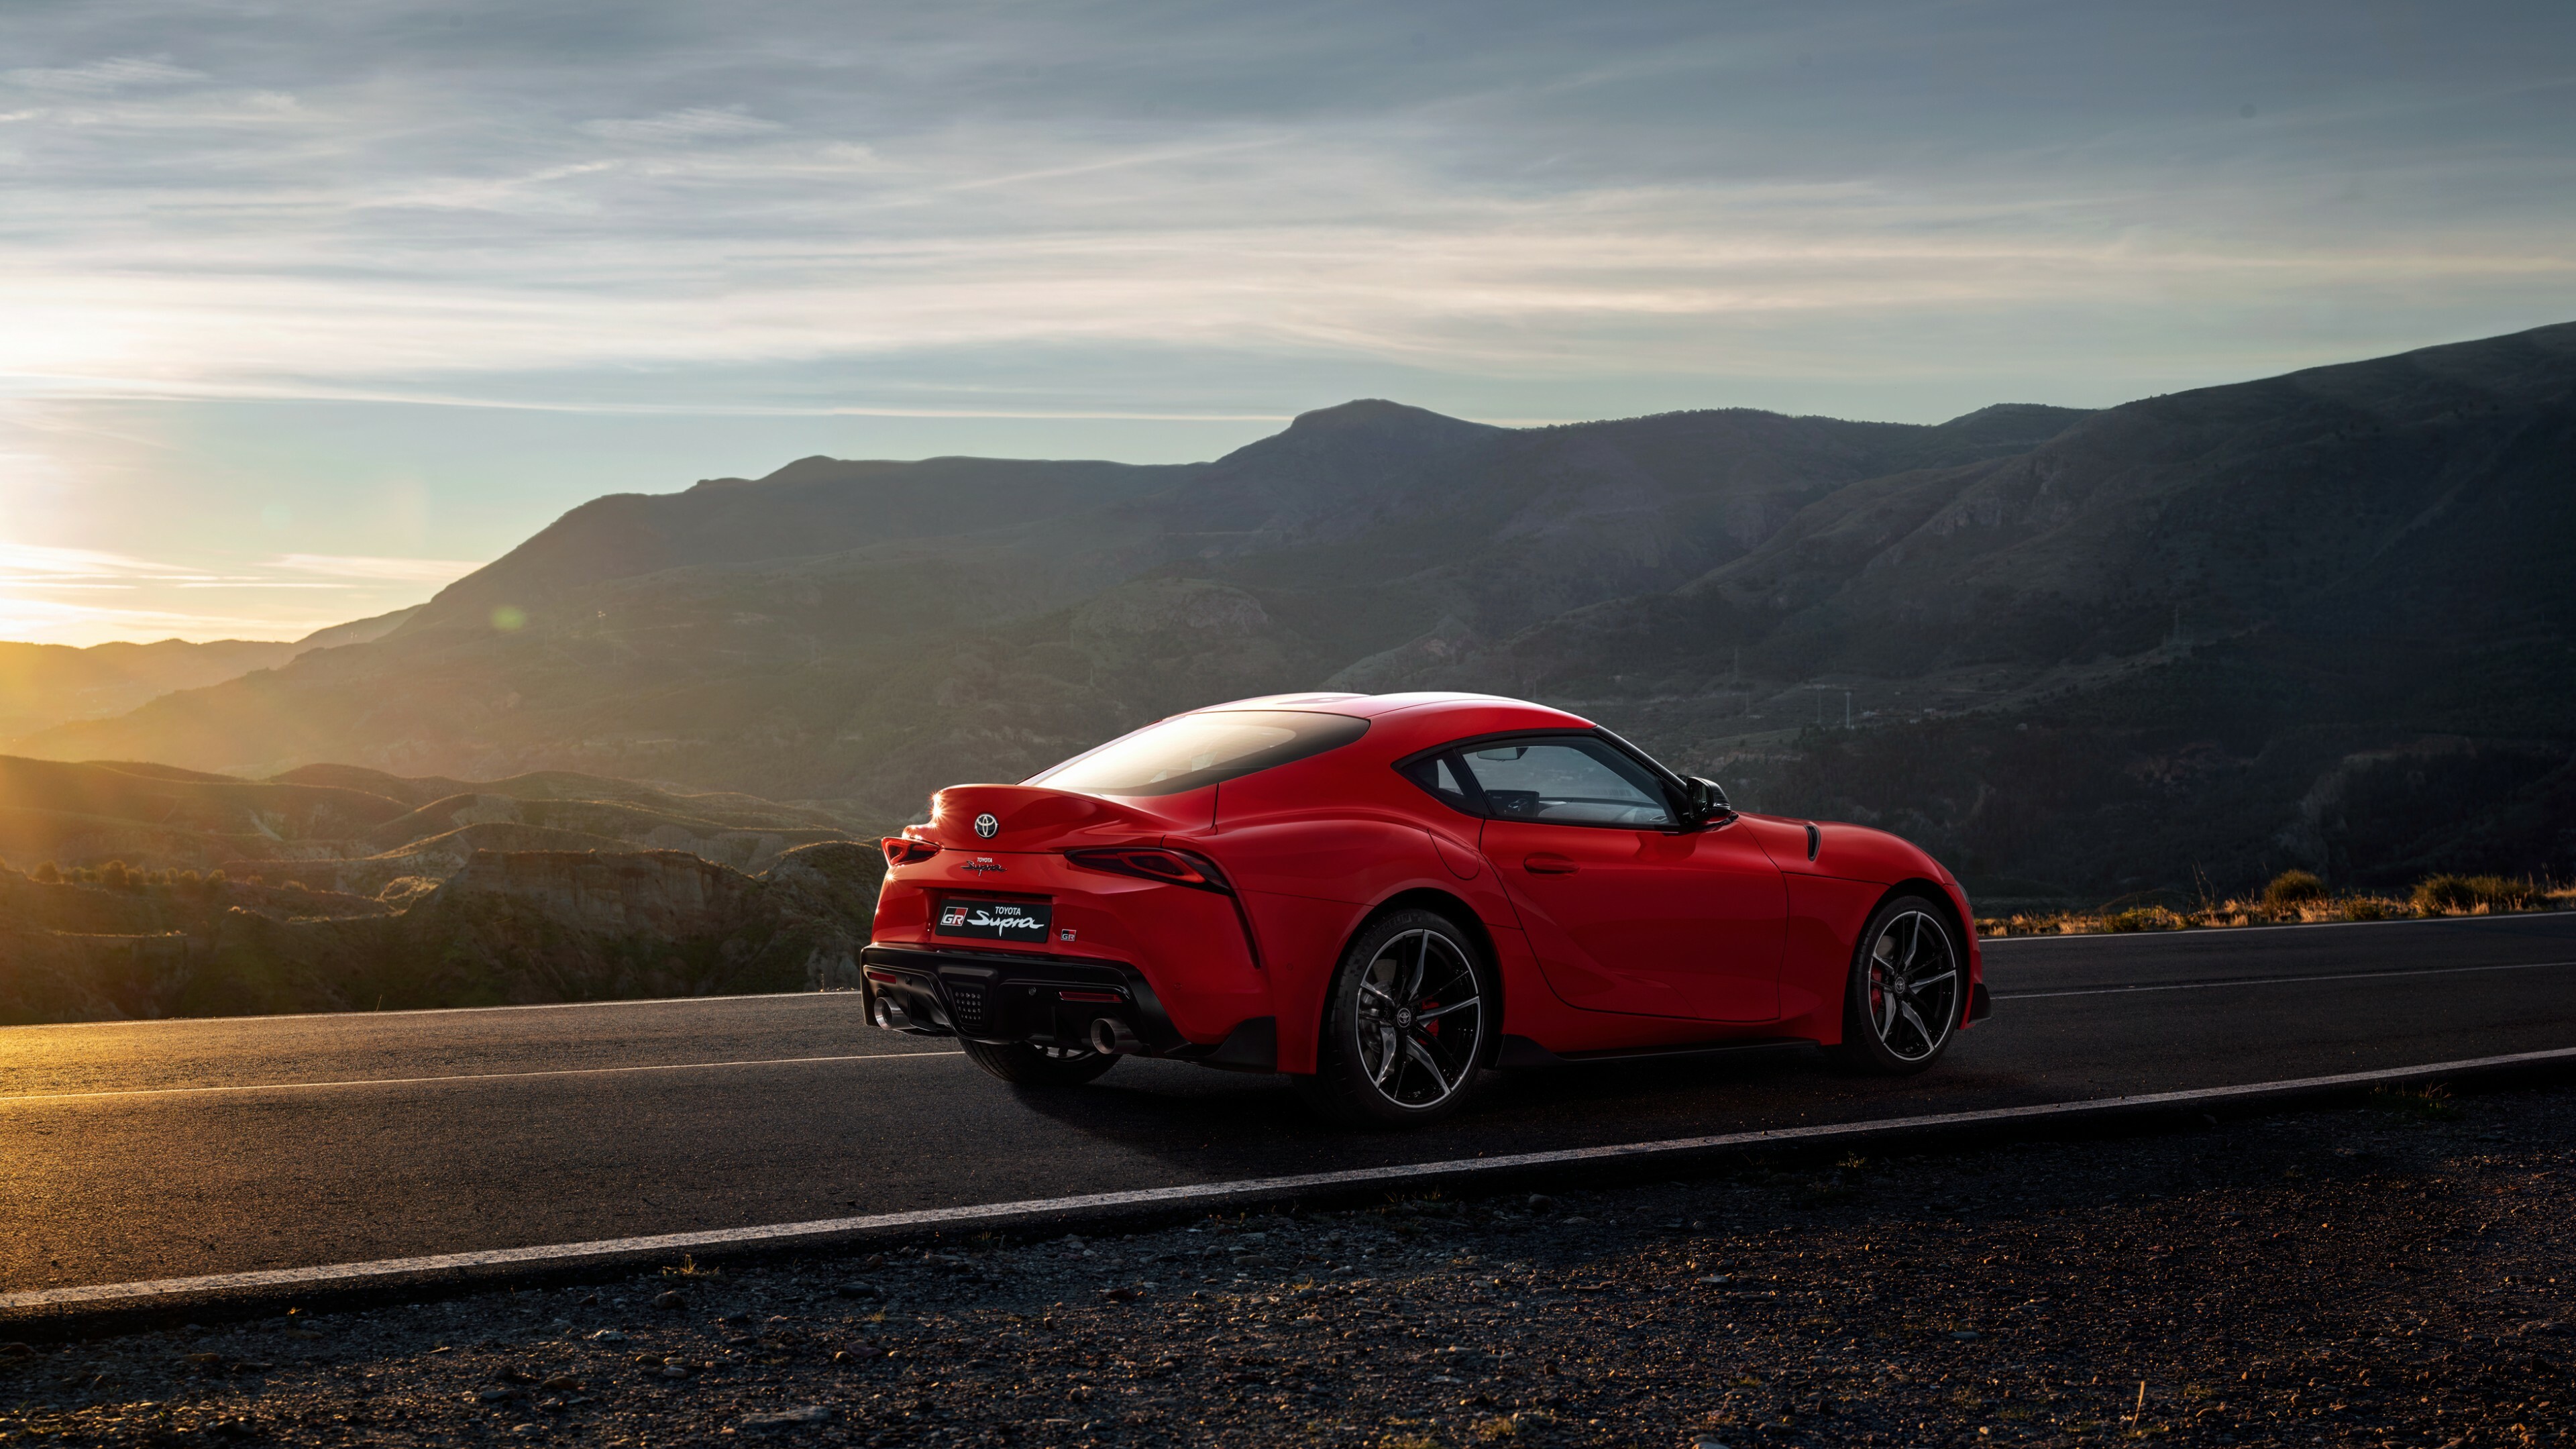 Toyota: The largest automobile manufacturer in the world, Supra A90, 2020 cars. 3840x2160 4K Wallpaper.